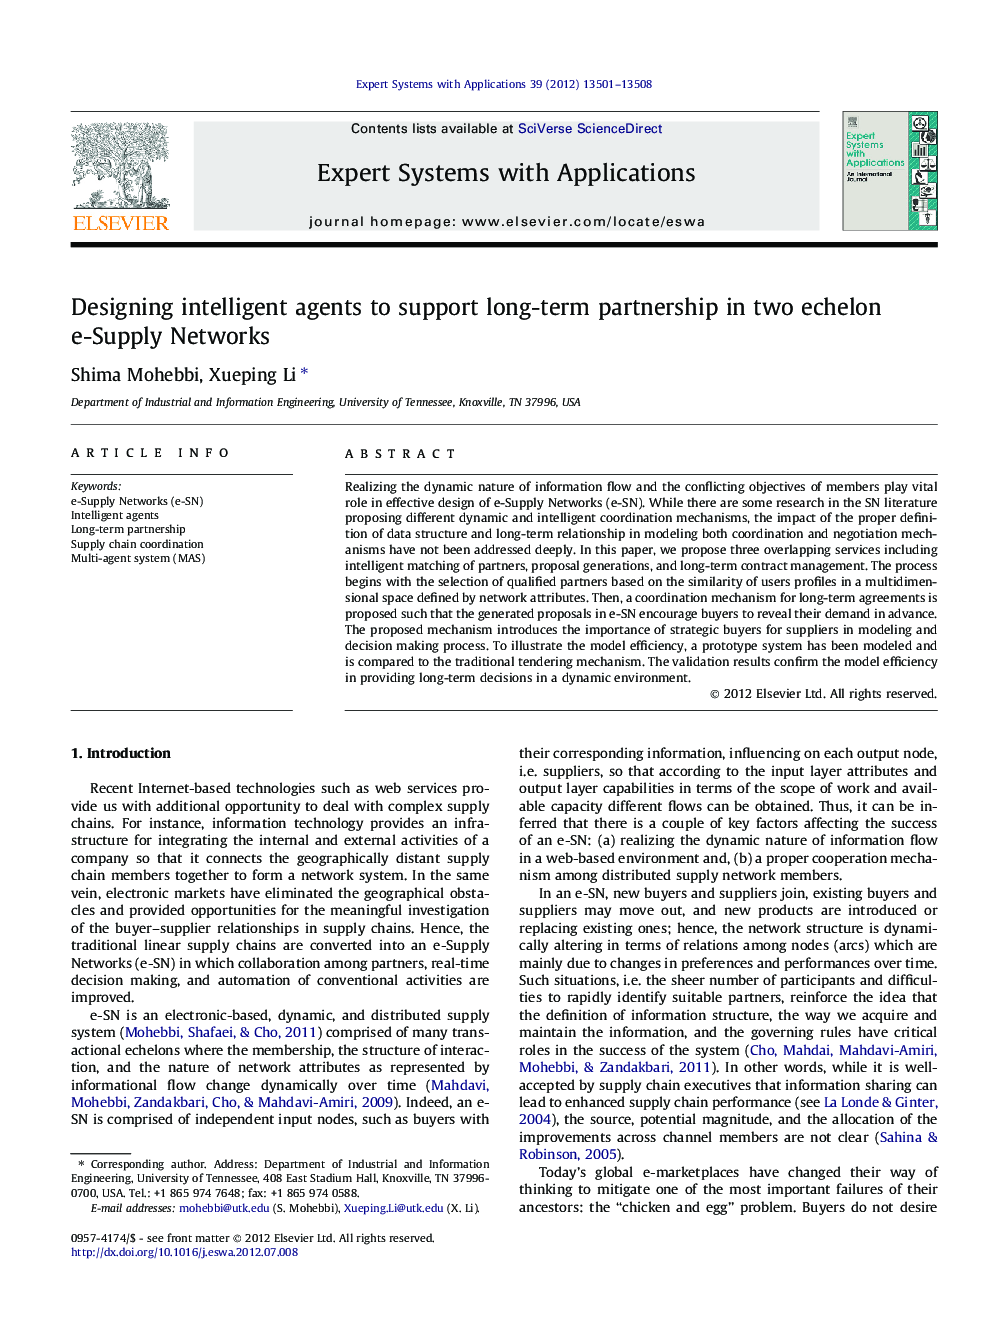 Designing intelligent agents to support long-term partnership in two echelon e-Supply Networks